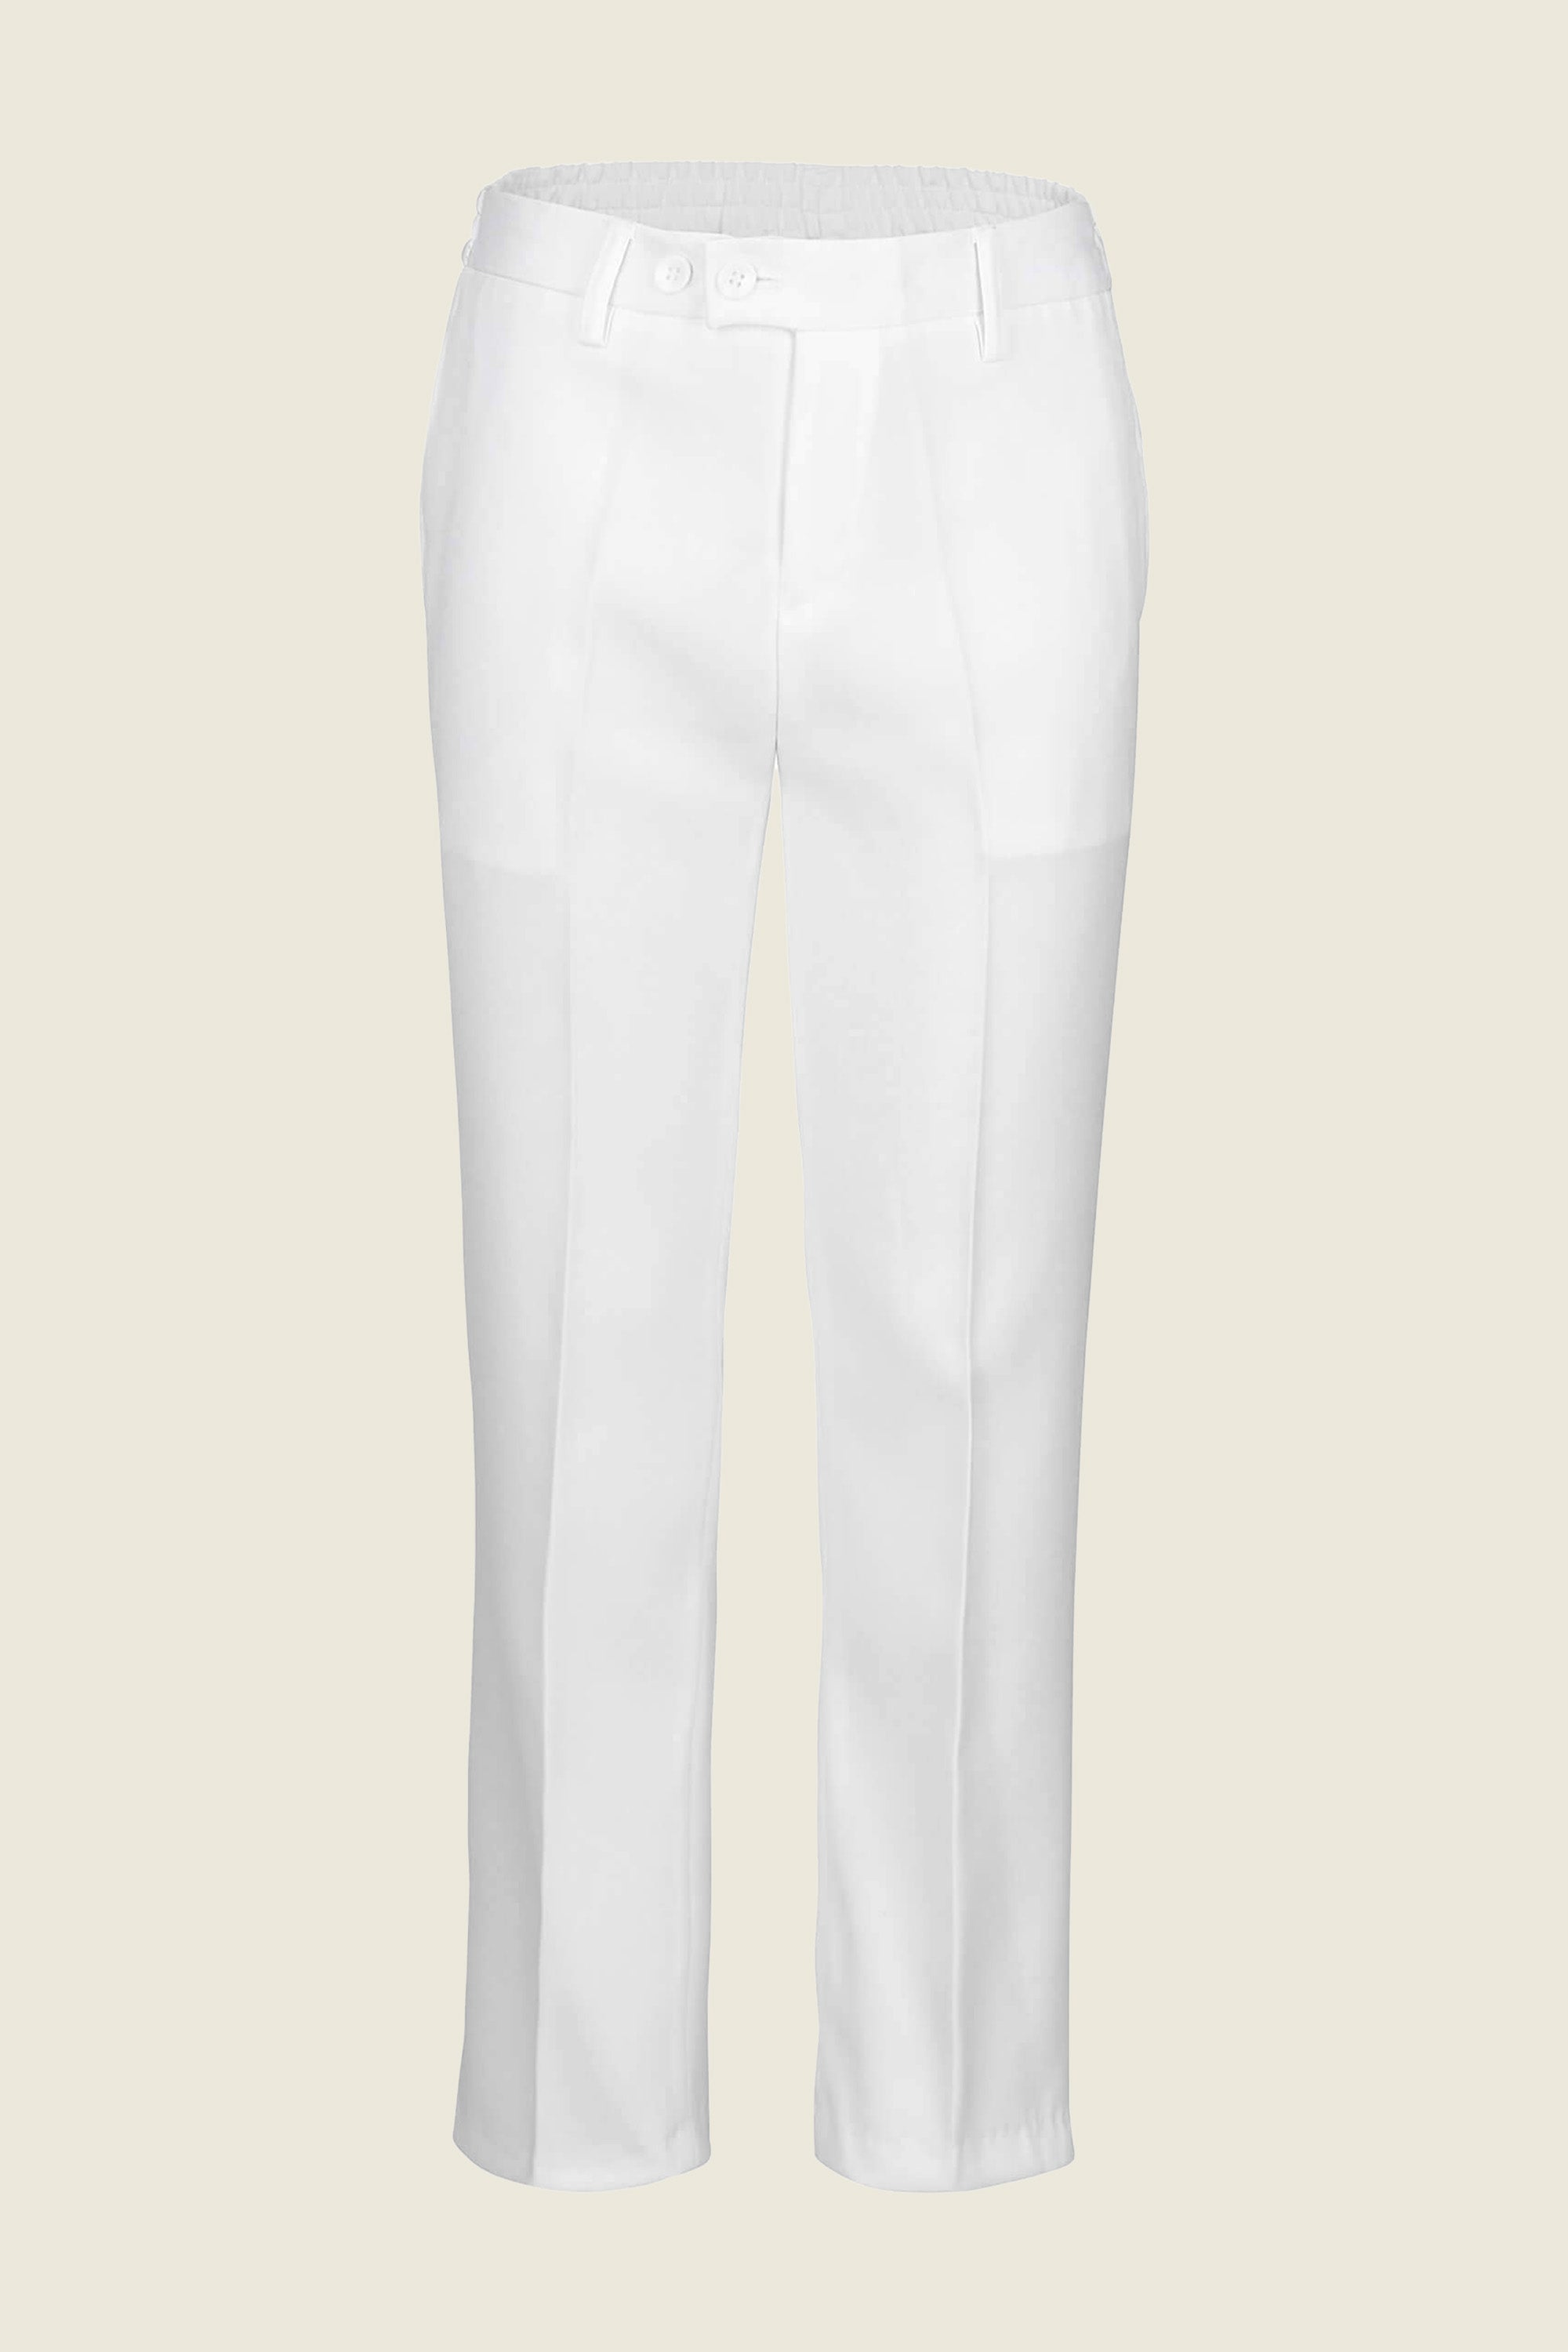 Boys Off White Trousers